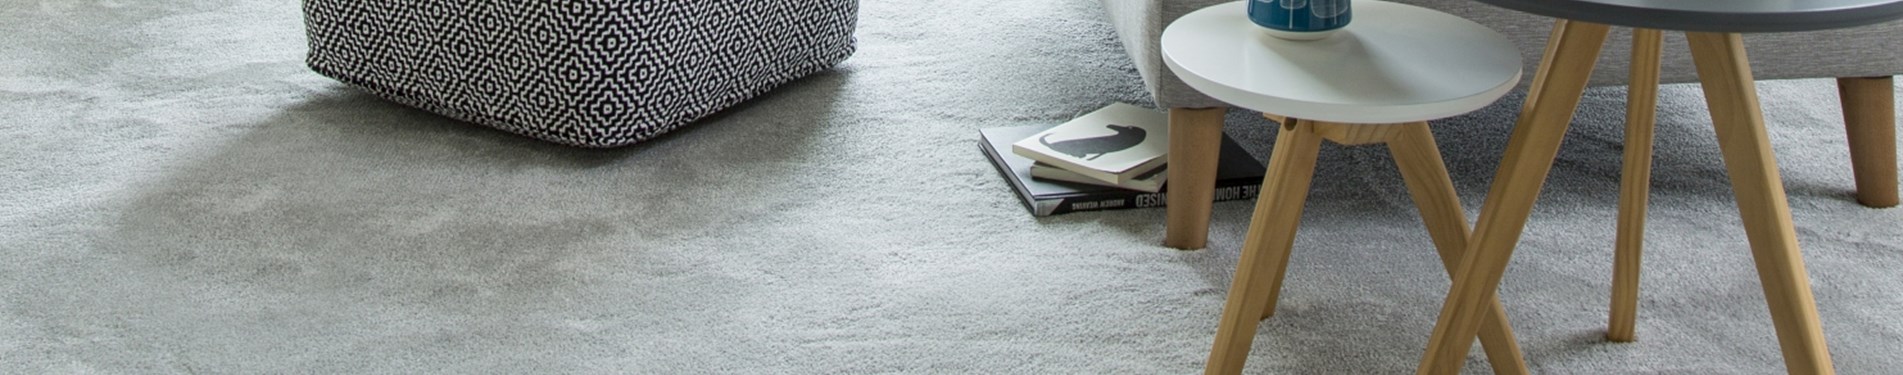 Making your home just right with a new carpet